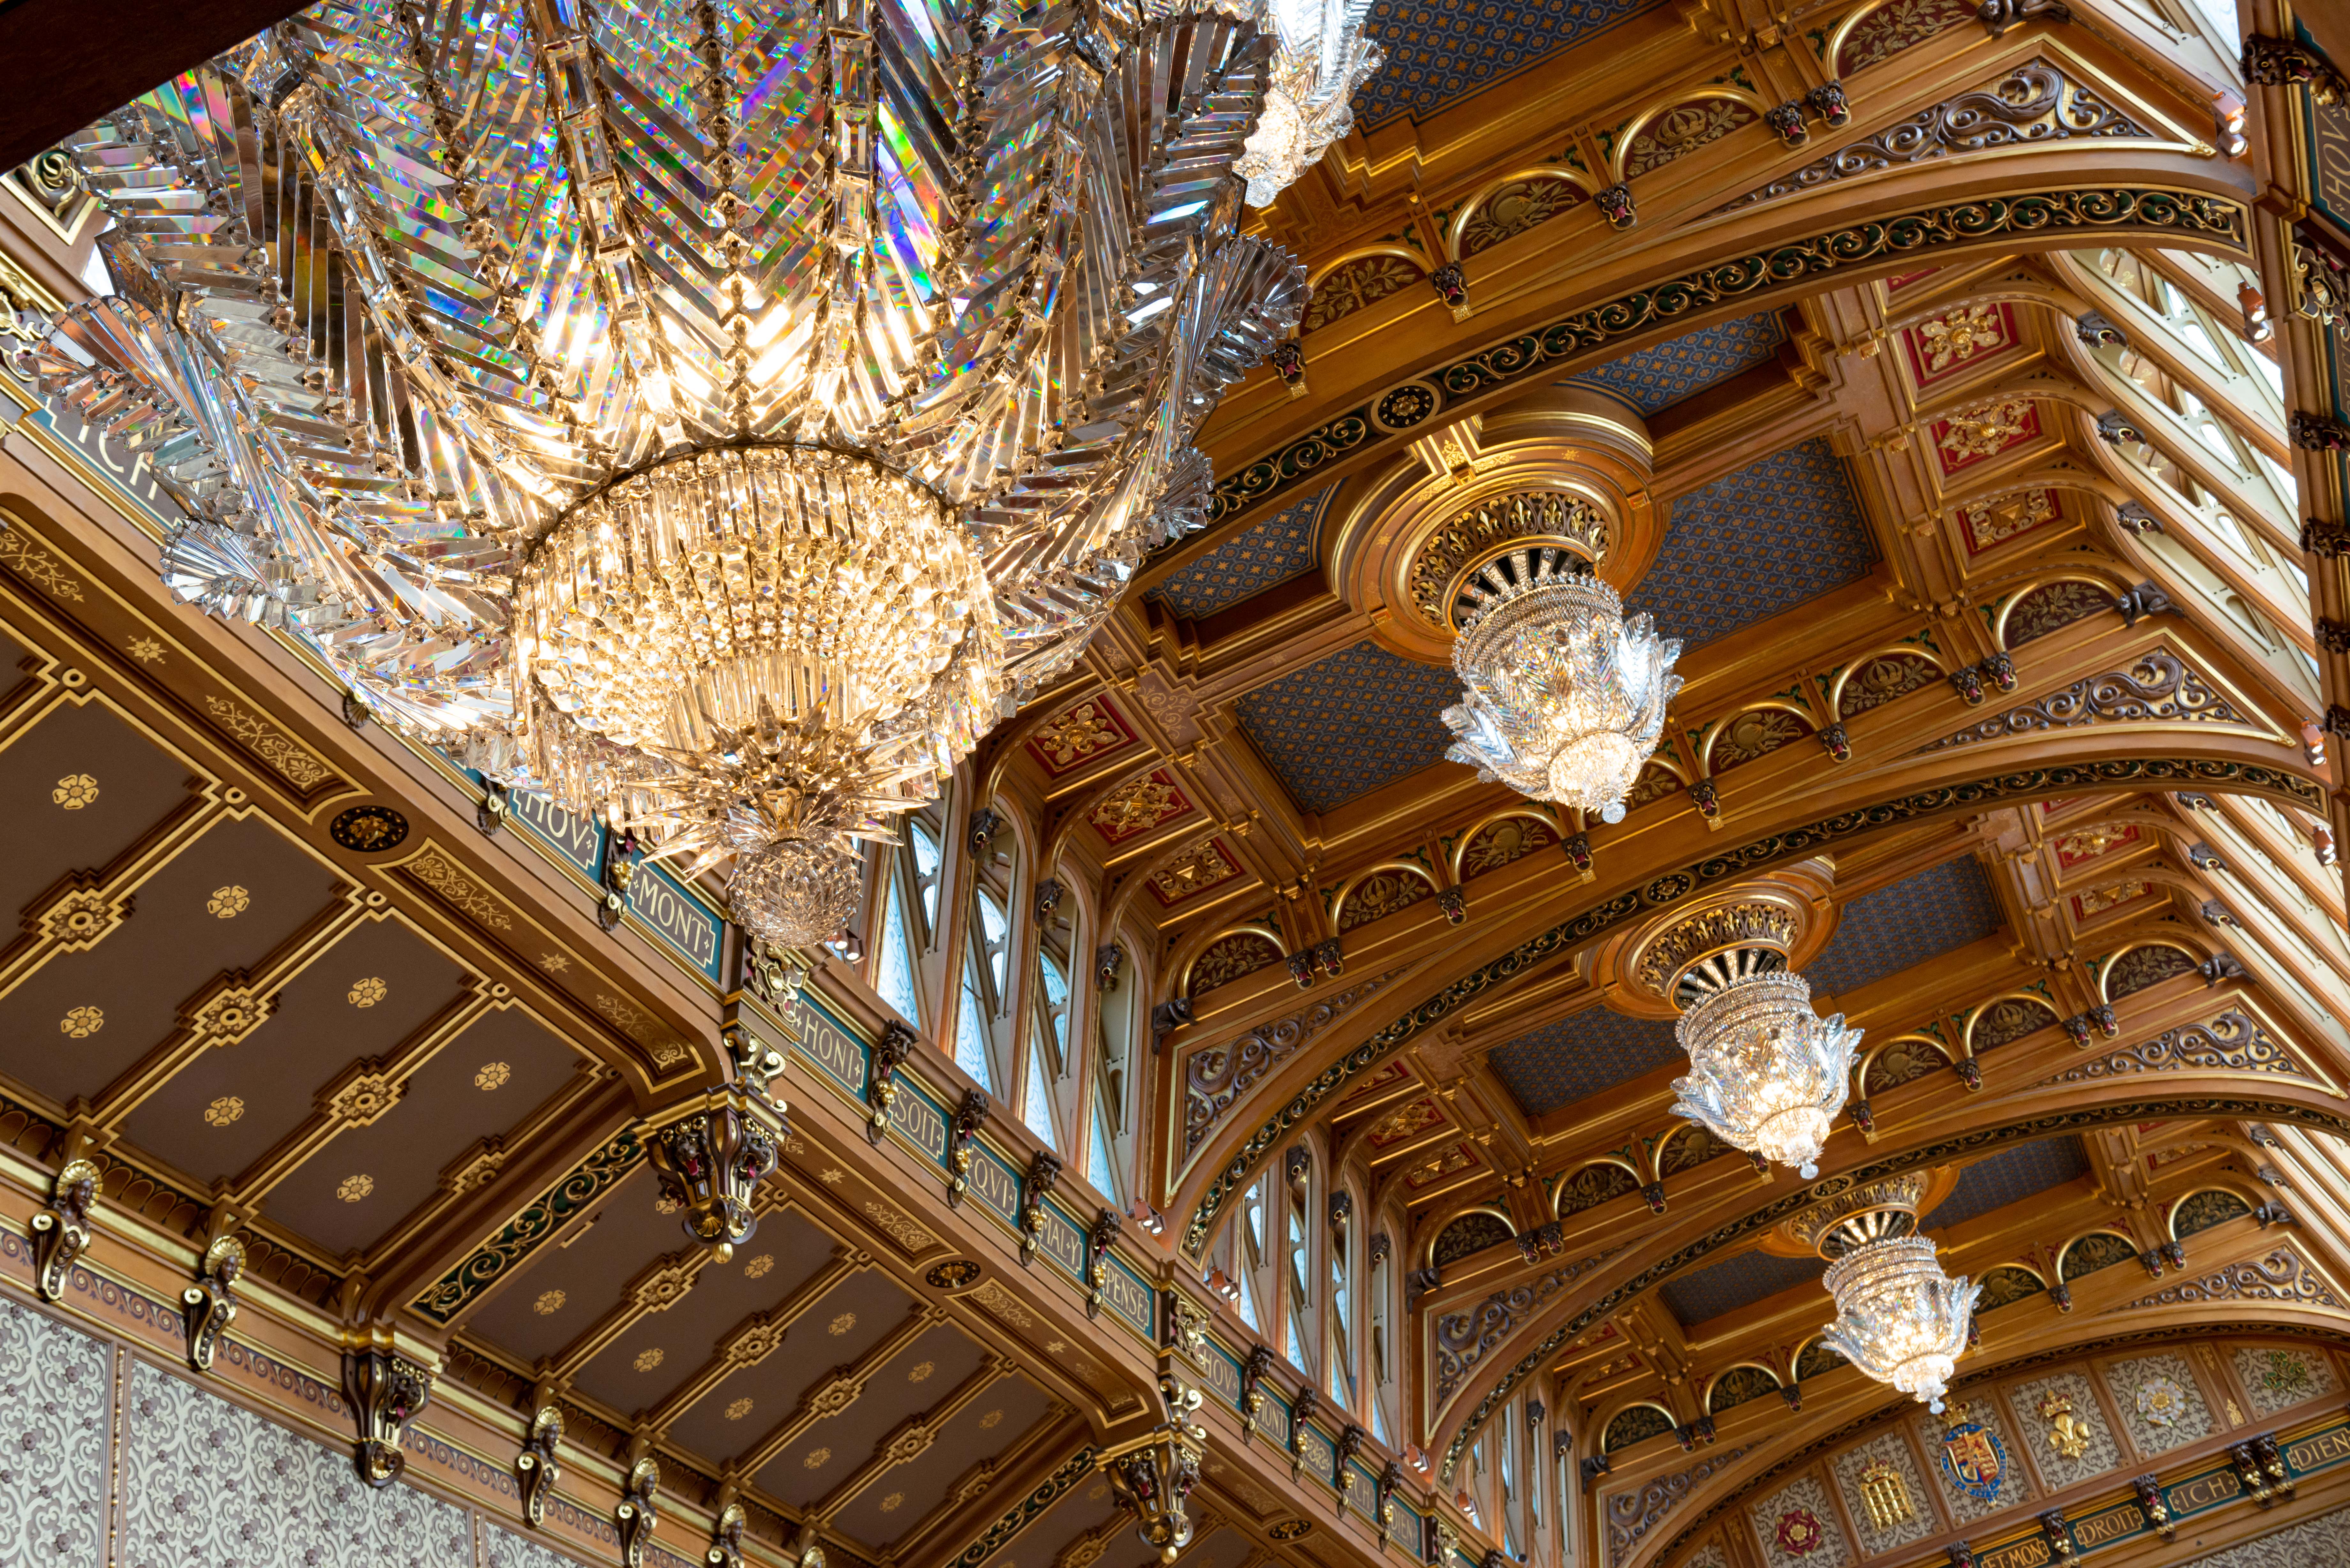 The opulent chandeliers hanging from the ceiling of the Waterloo Chamber 